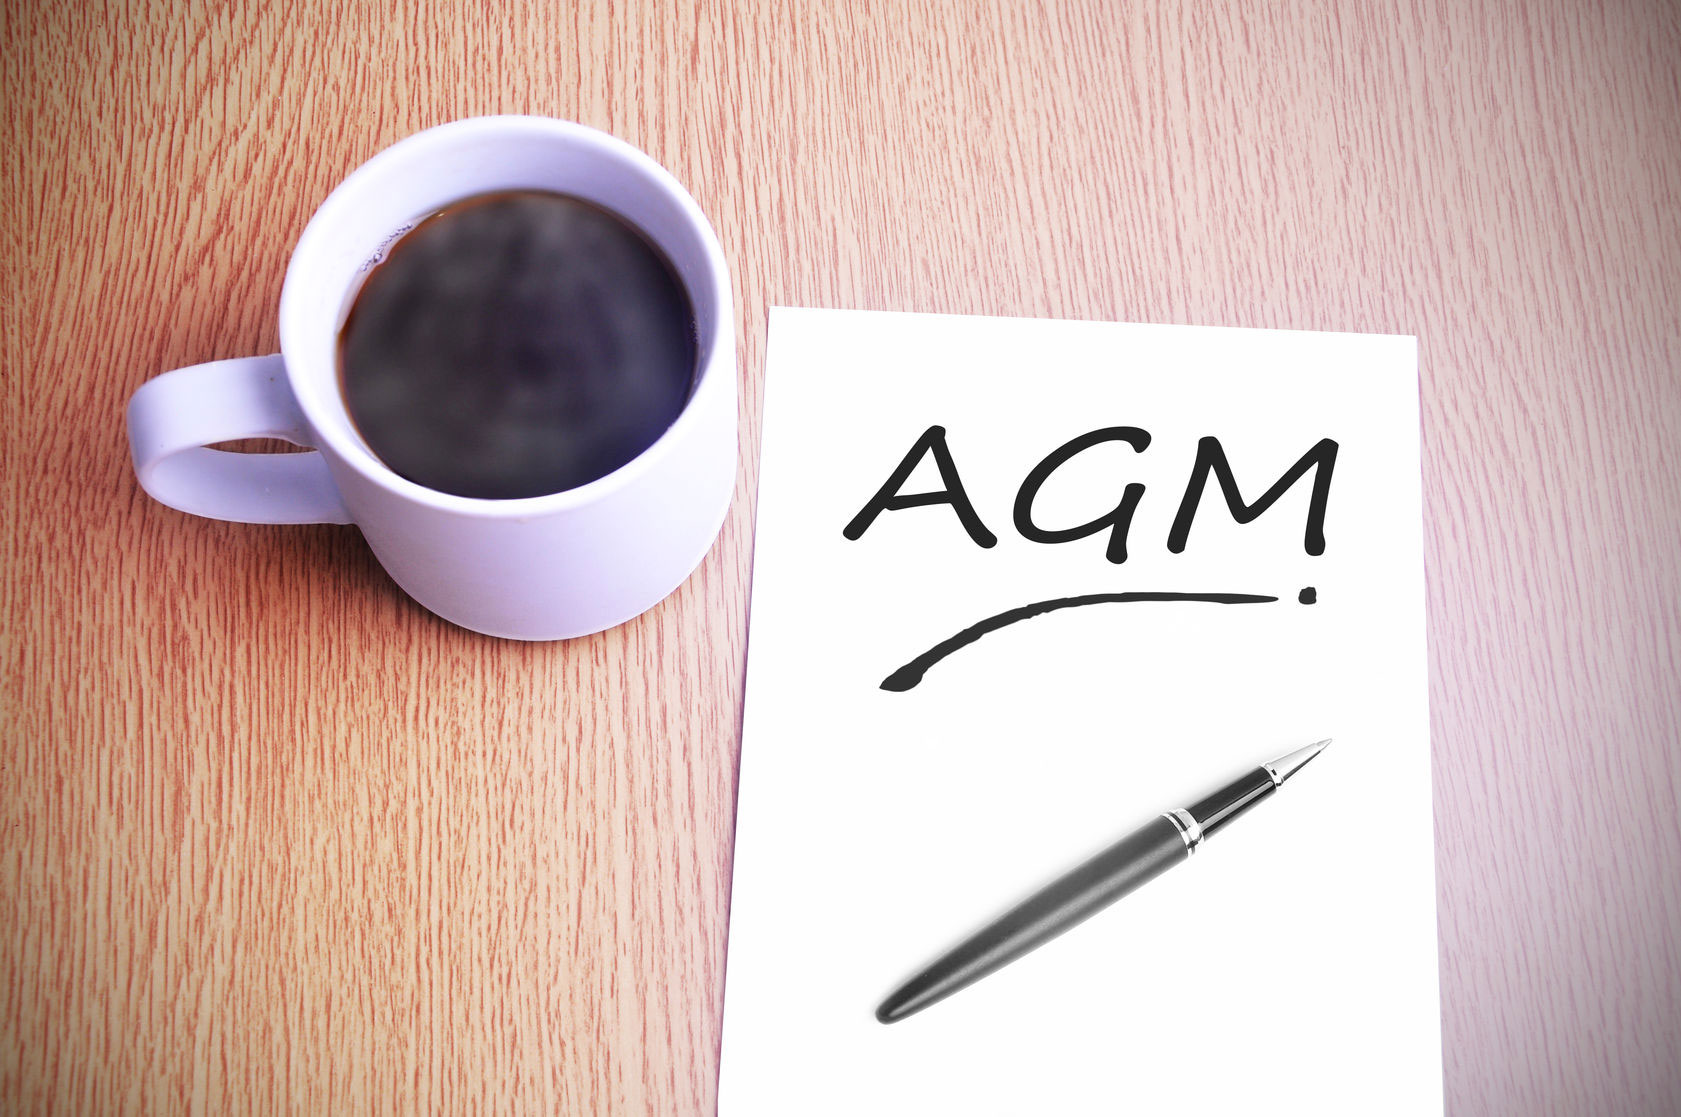 Date set for AGM